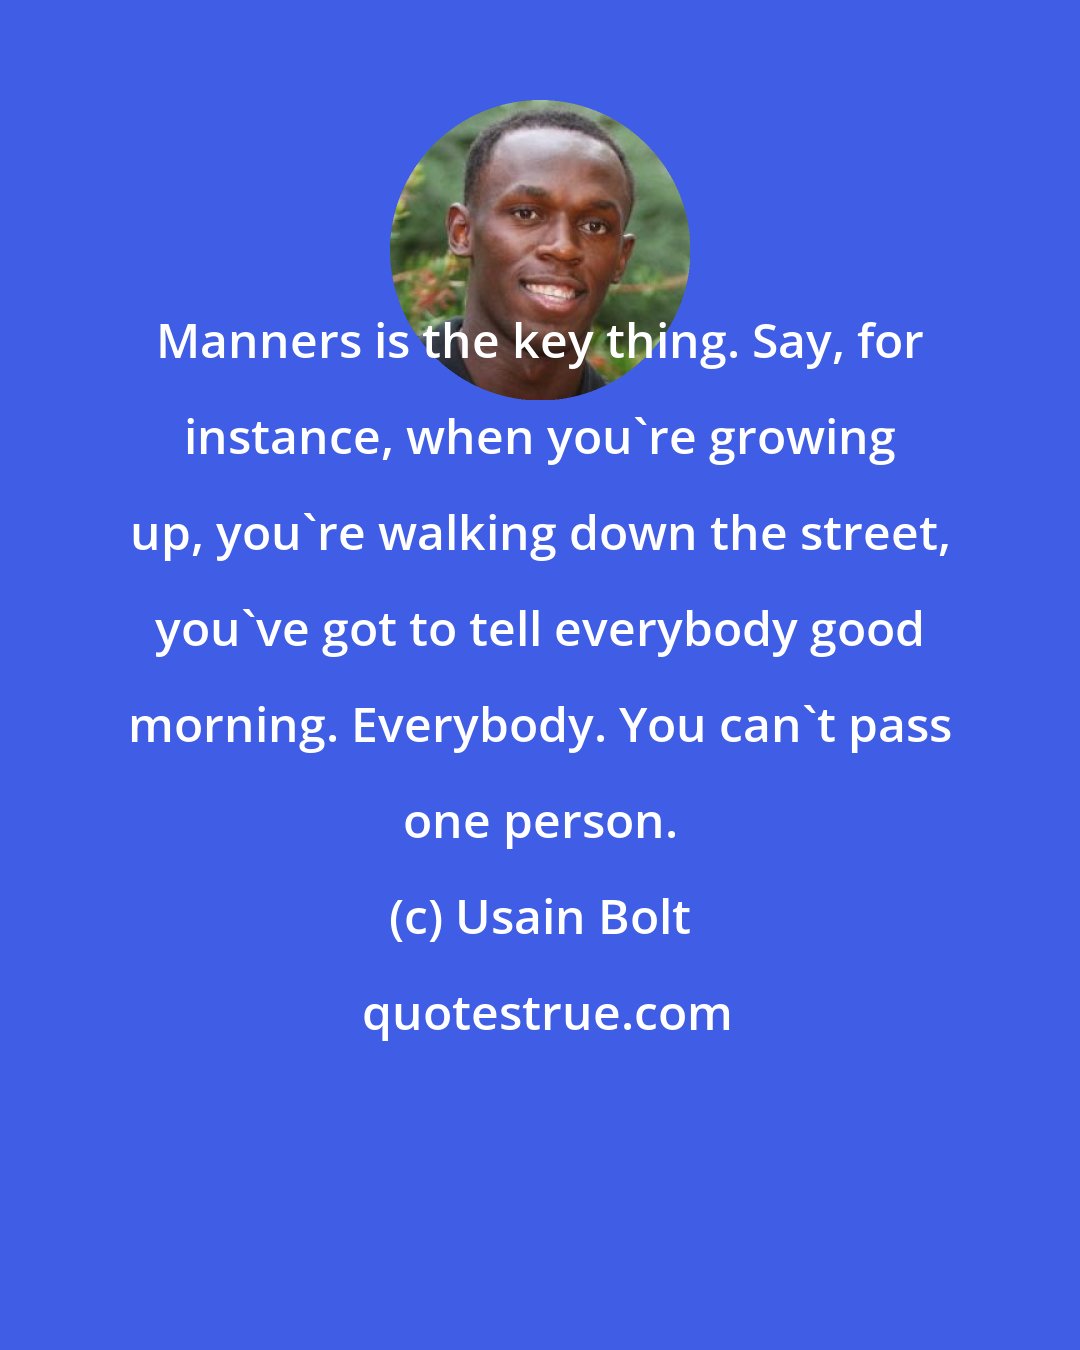 Usain Bolt: Manners is the key thing. Say, for instance, when you're growing up, you're walking down the street, you've got to tell everybody good morning. Everybody. You can't pass one person.